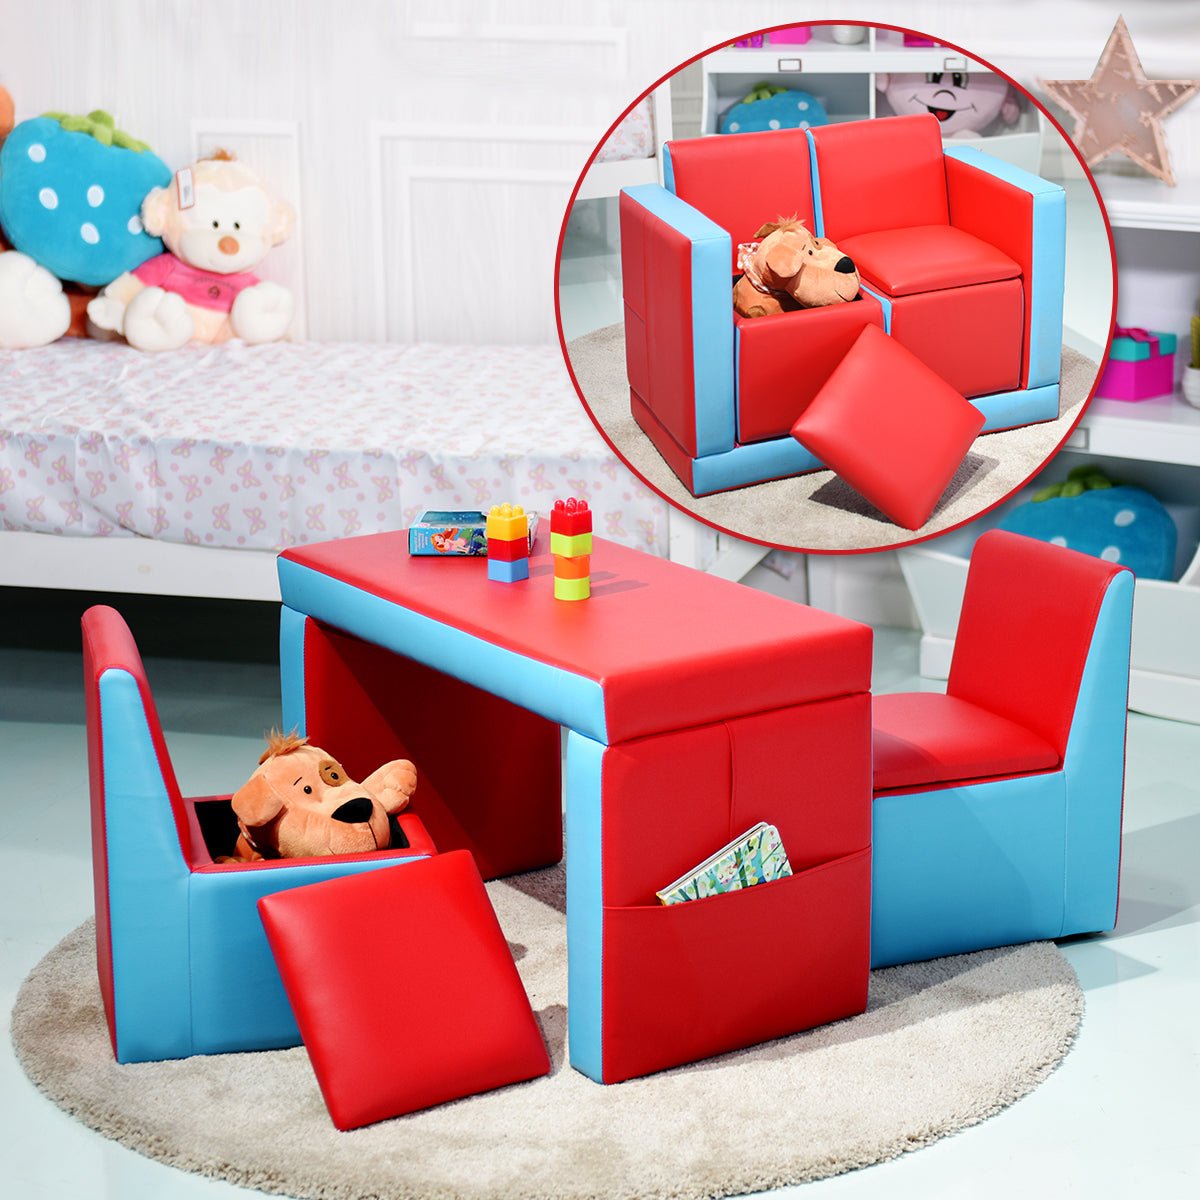 Red Children's Sofa with Wooden Frame and Storage - Relaxation and Order